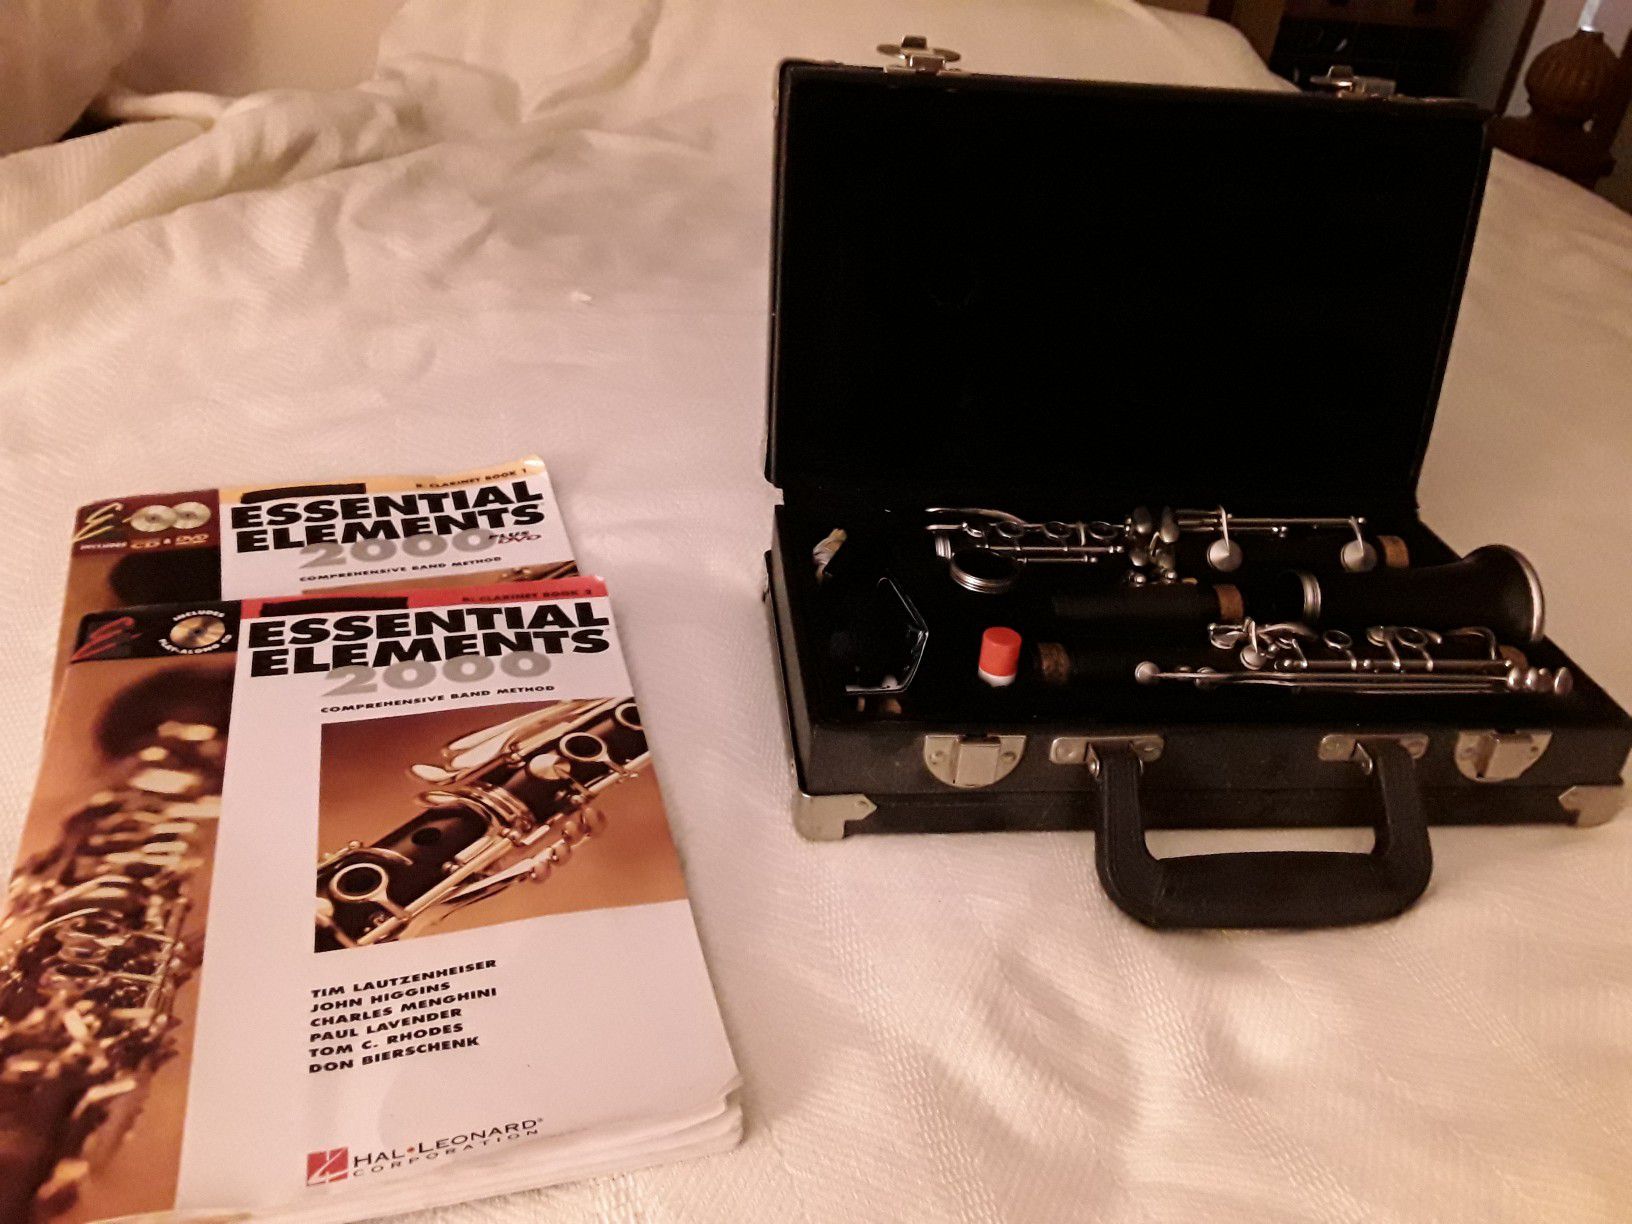 Clarinet with 2 instruction books